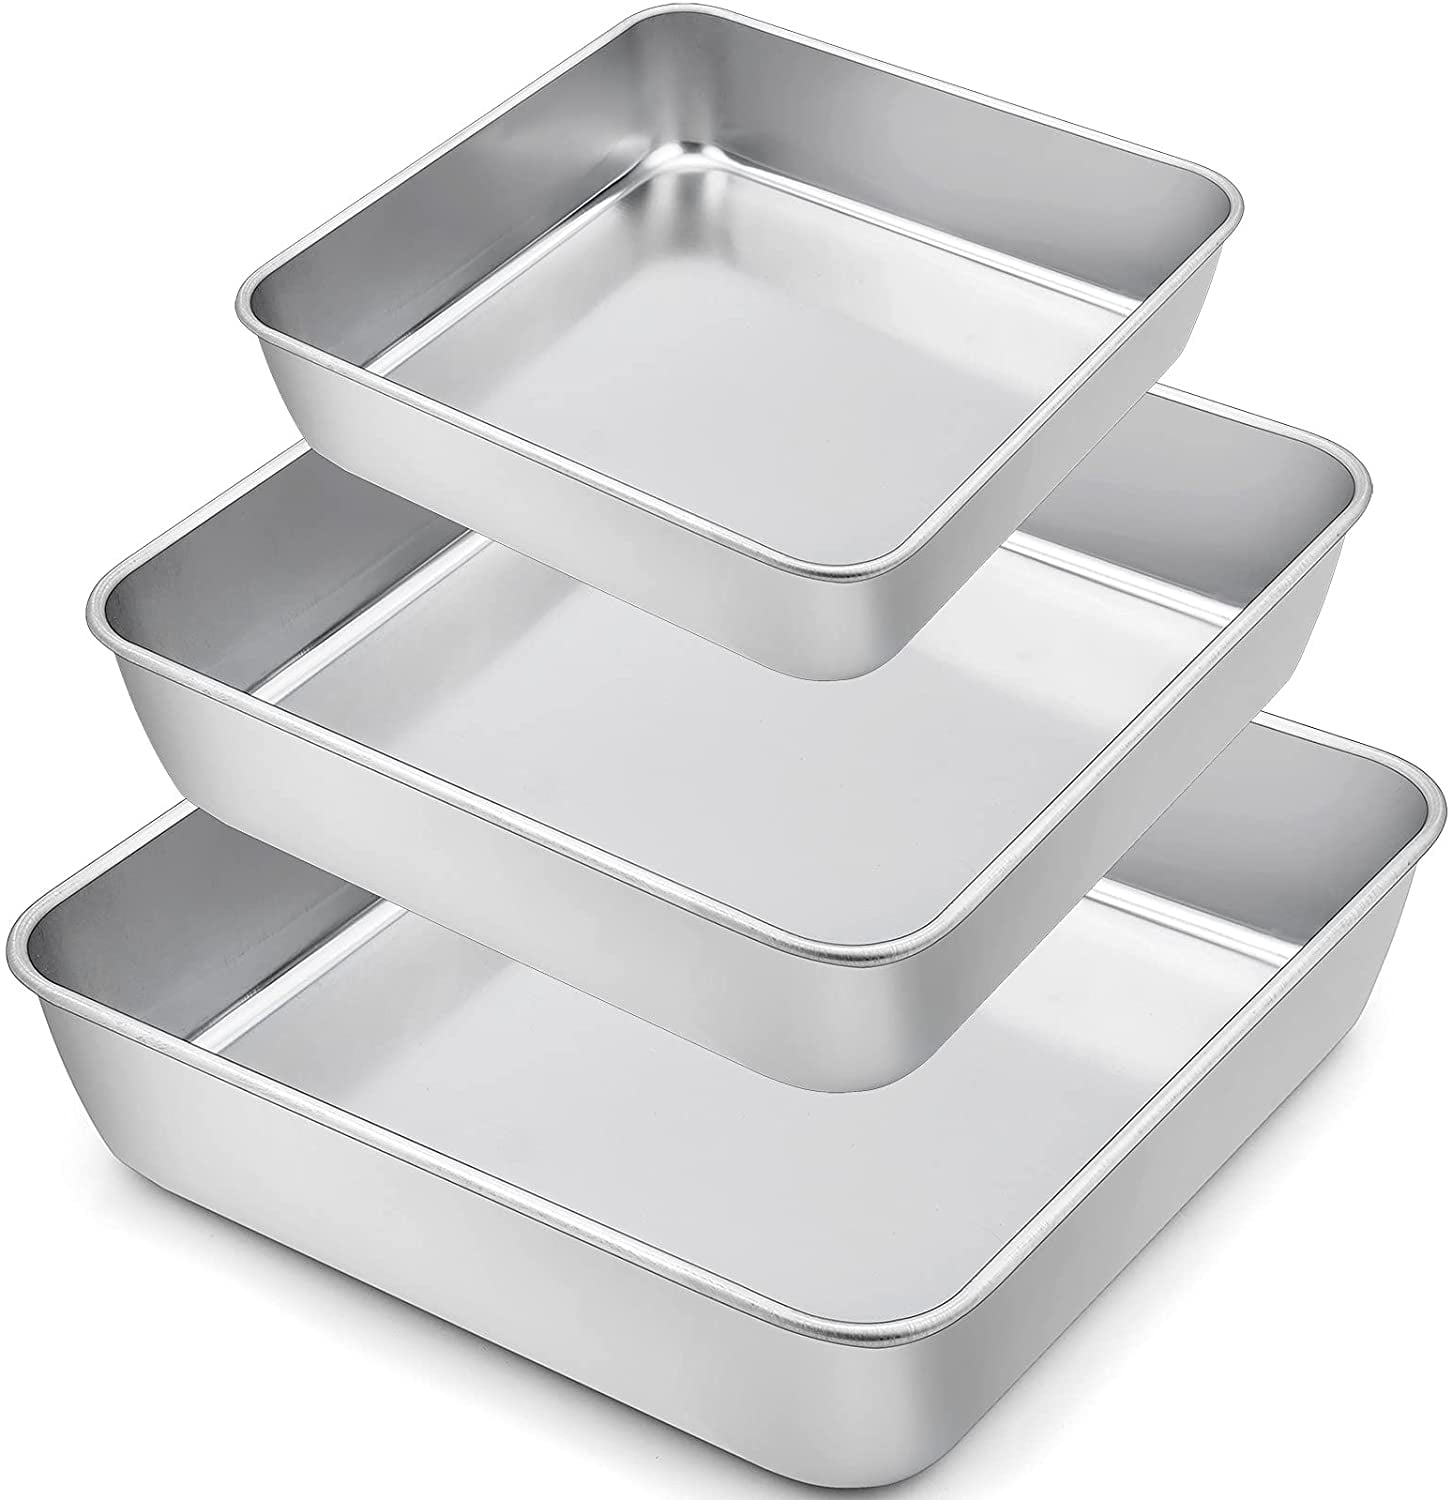 Healthy & Heavy Duty Stainless Steel Square Baking Lasagna Brownie Pan with Lid for Meal Prep Storage Transporting Food Dishwasher Safe TeamFar 6 Inch Square Cake Pan with Lid 2 Pans & 2 Lids 